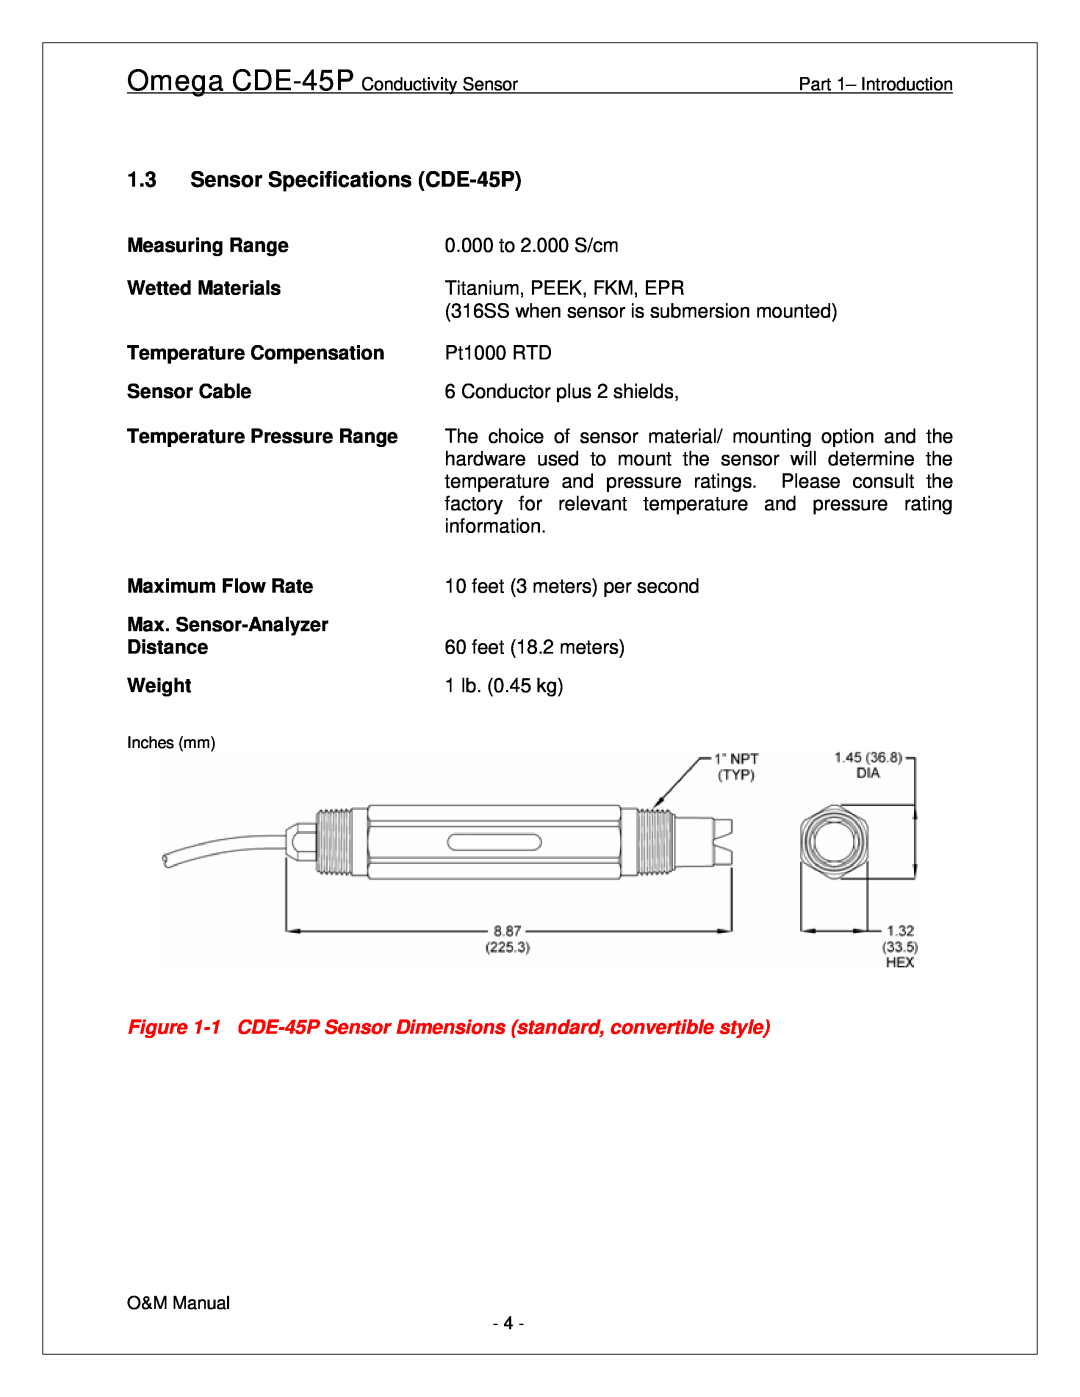 Omega Engineering Sensor Specifications CDE-45P, Measuring Range, Wetted Materials, Temperature Compensation, Distance 